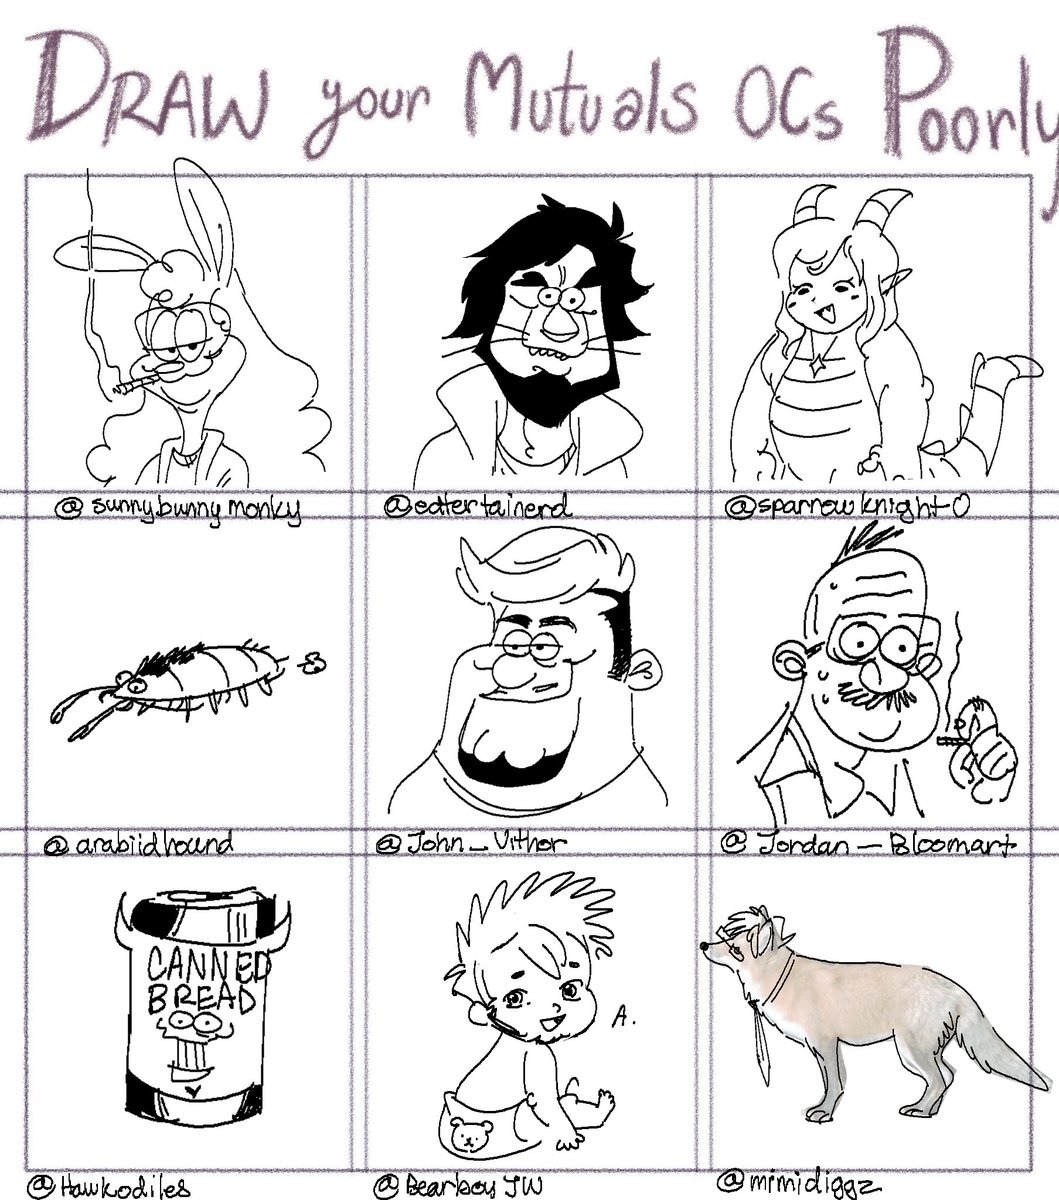 @Sunnybunnymonky @edtertainerd @Sparrowknight0 @arabiidhound @John_Vithor @jordan_bloomart @hawkodiles @BearBoyJW @Mimidiggz PLEASE DONT TAKE ANY OF THESE TAKES SERIOUSLY!! Its nothing personal just funny jokes! ;;w;;c #drawyourmutualsocspoorly https://t.co/rTKprtKQqa 